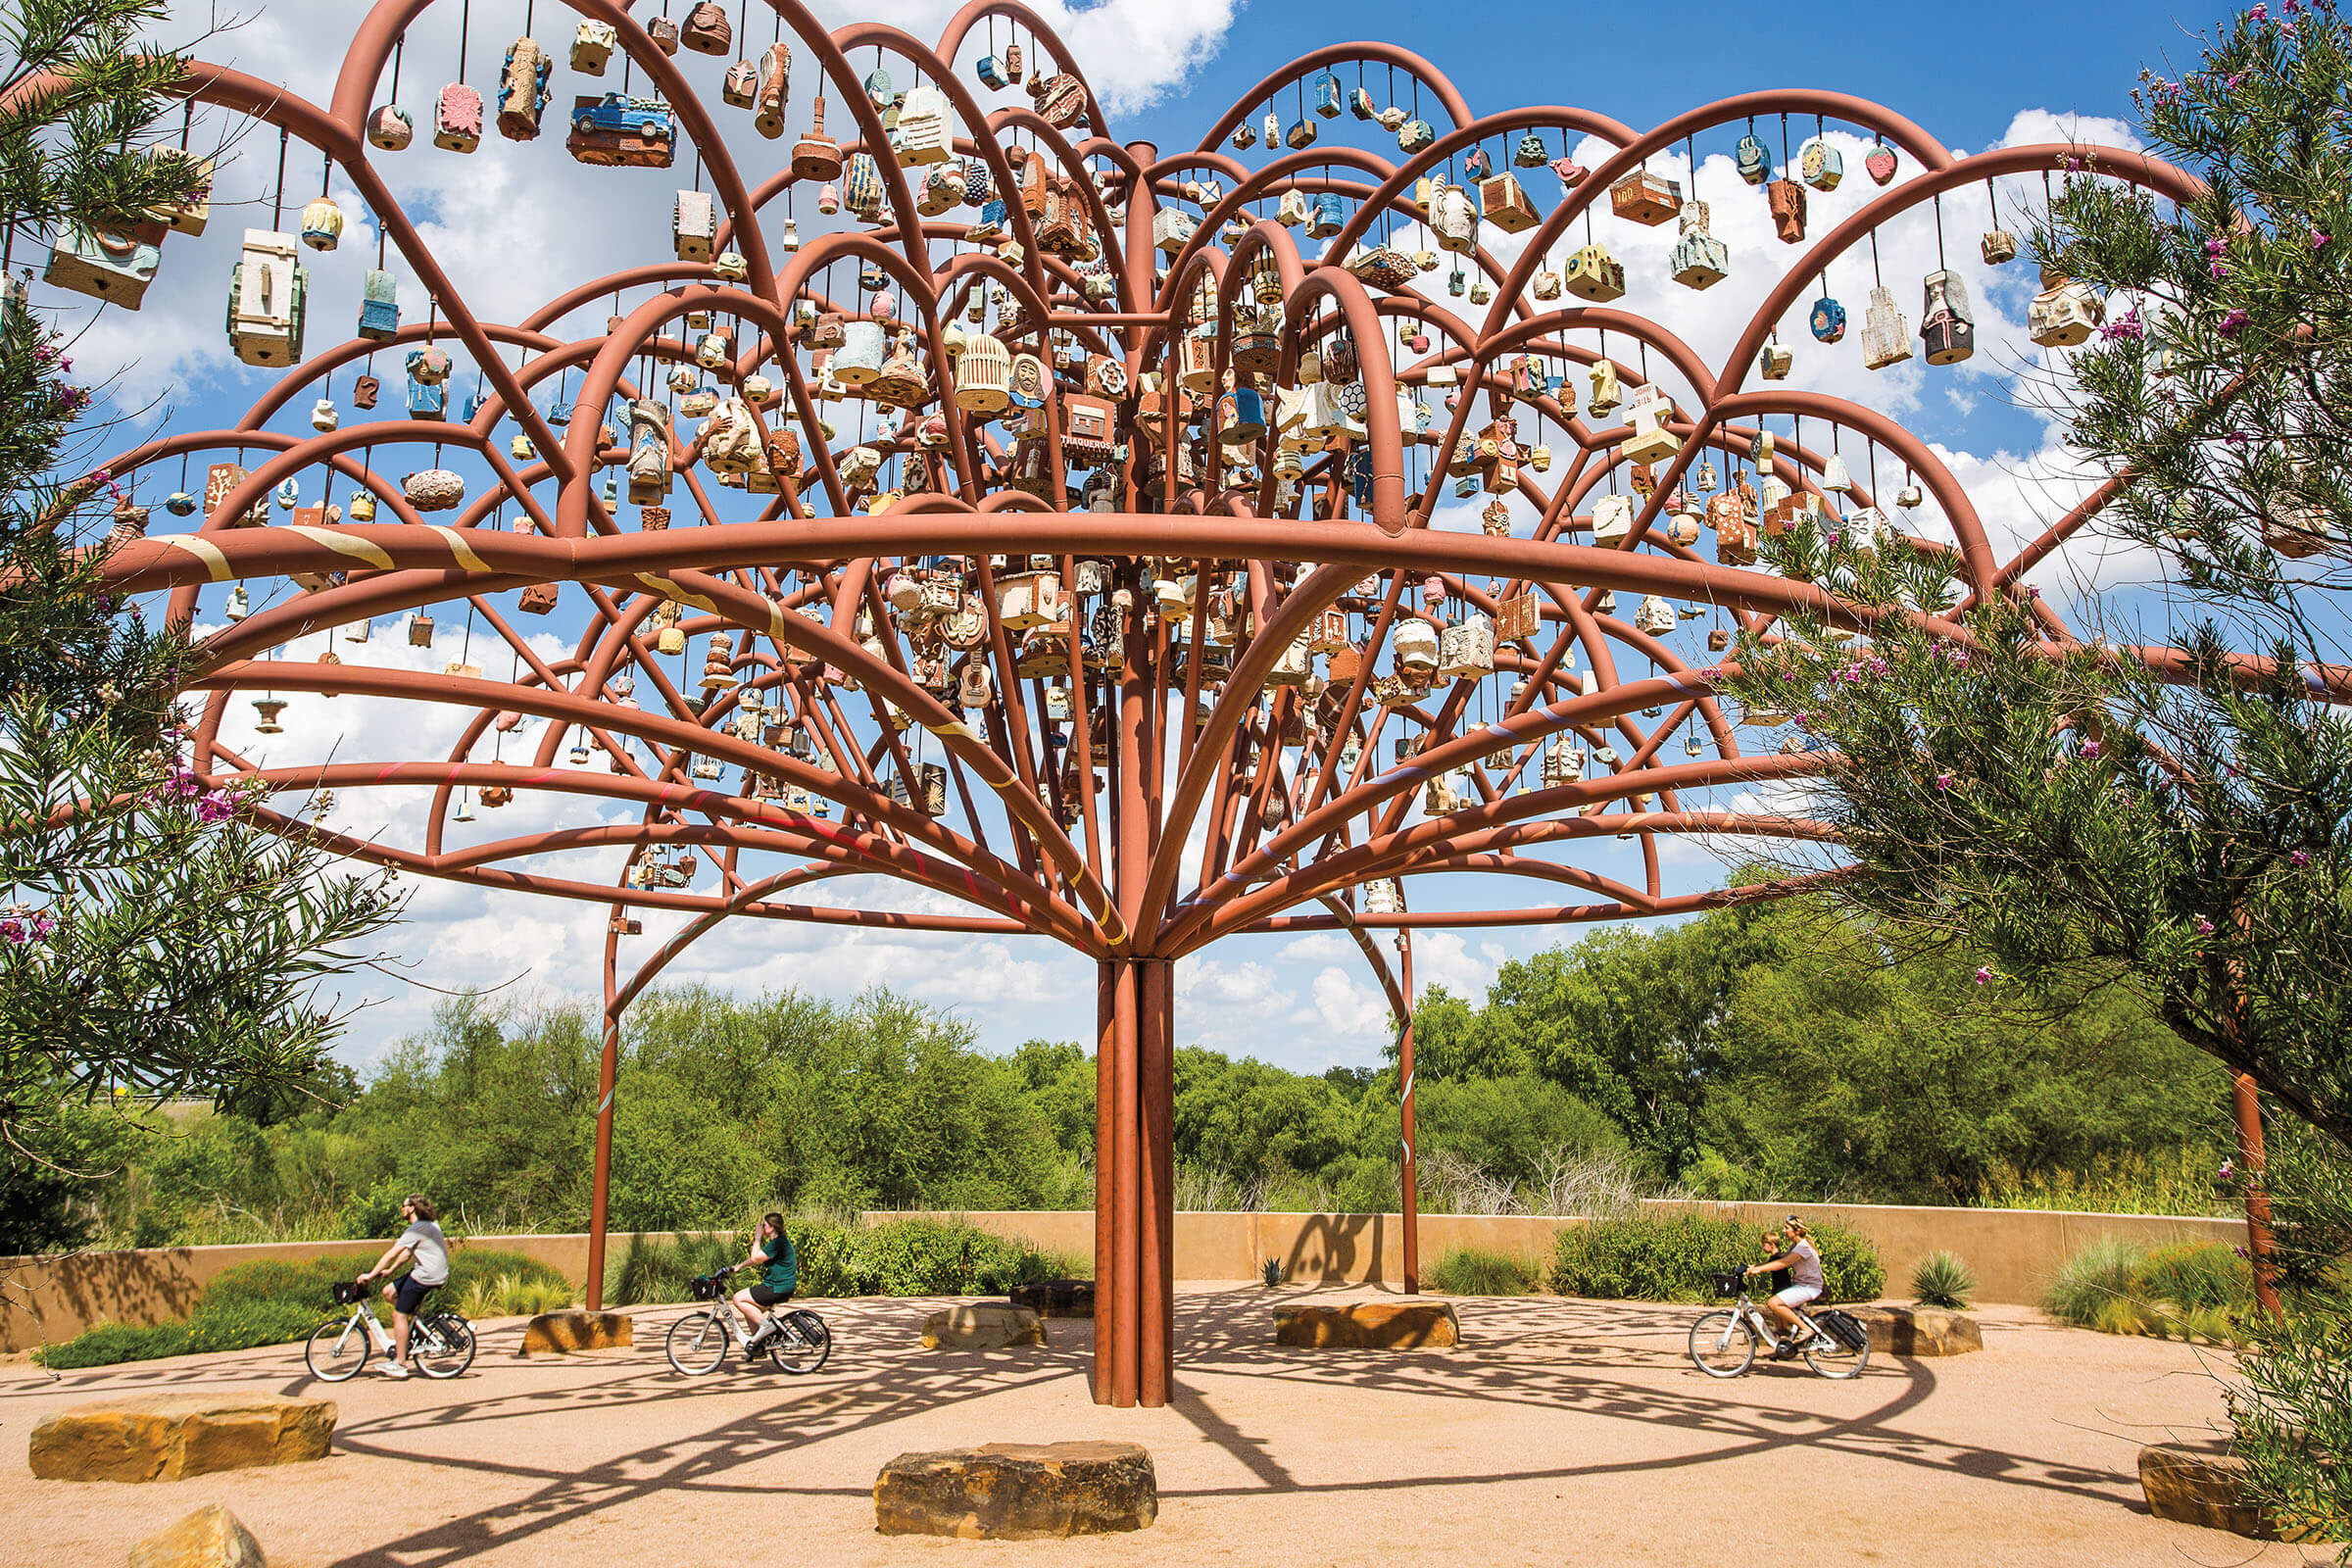 A rust-red tree sculpture filled with decorative ornaments on dusty ground under blue sky